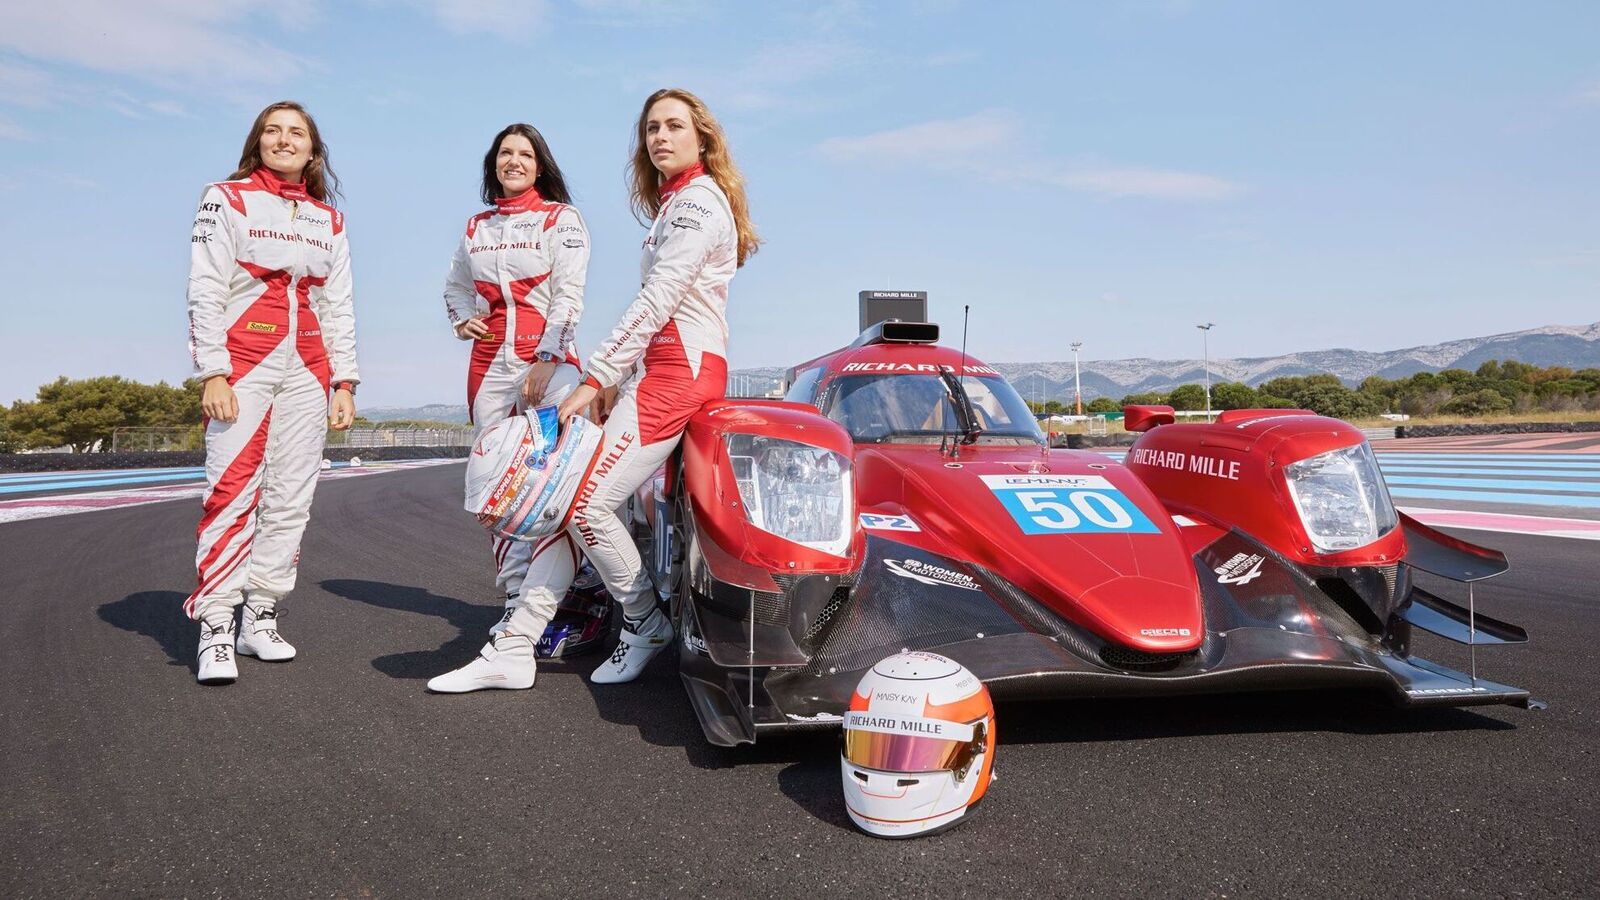 Why should boys have all the fun? F1 launches new all-female